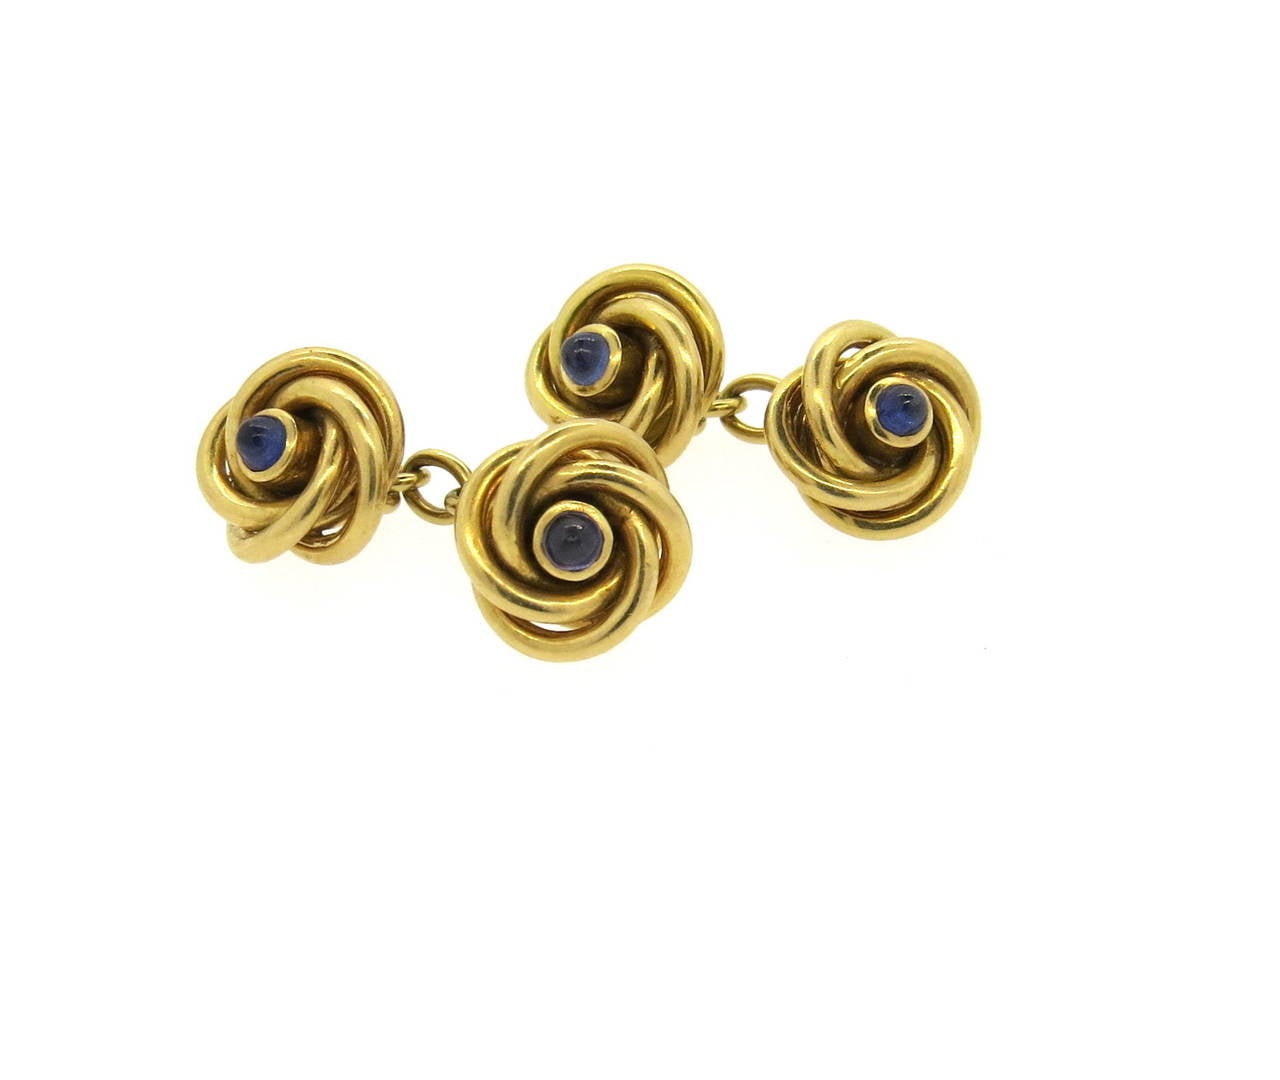 Retro 18k gold knot cufflinks, decorated with sapphires in the center. Cufflink top measures 13mm in diameter. Weight - 18.1 grams